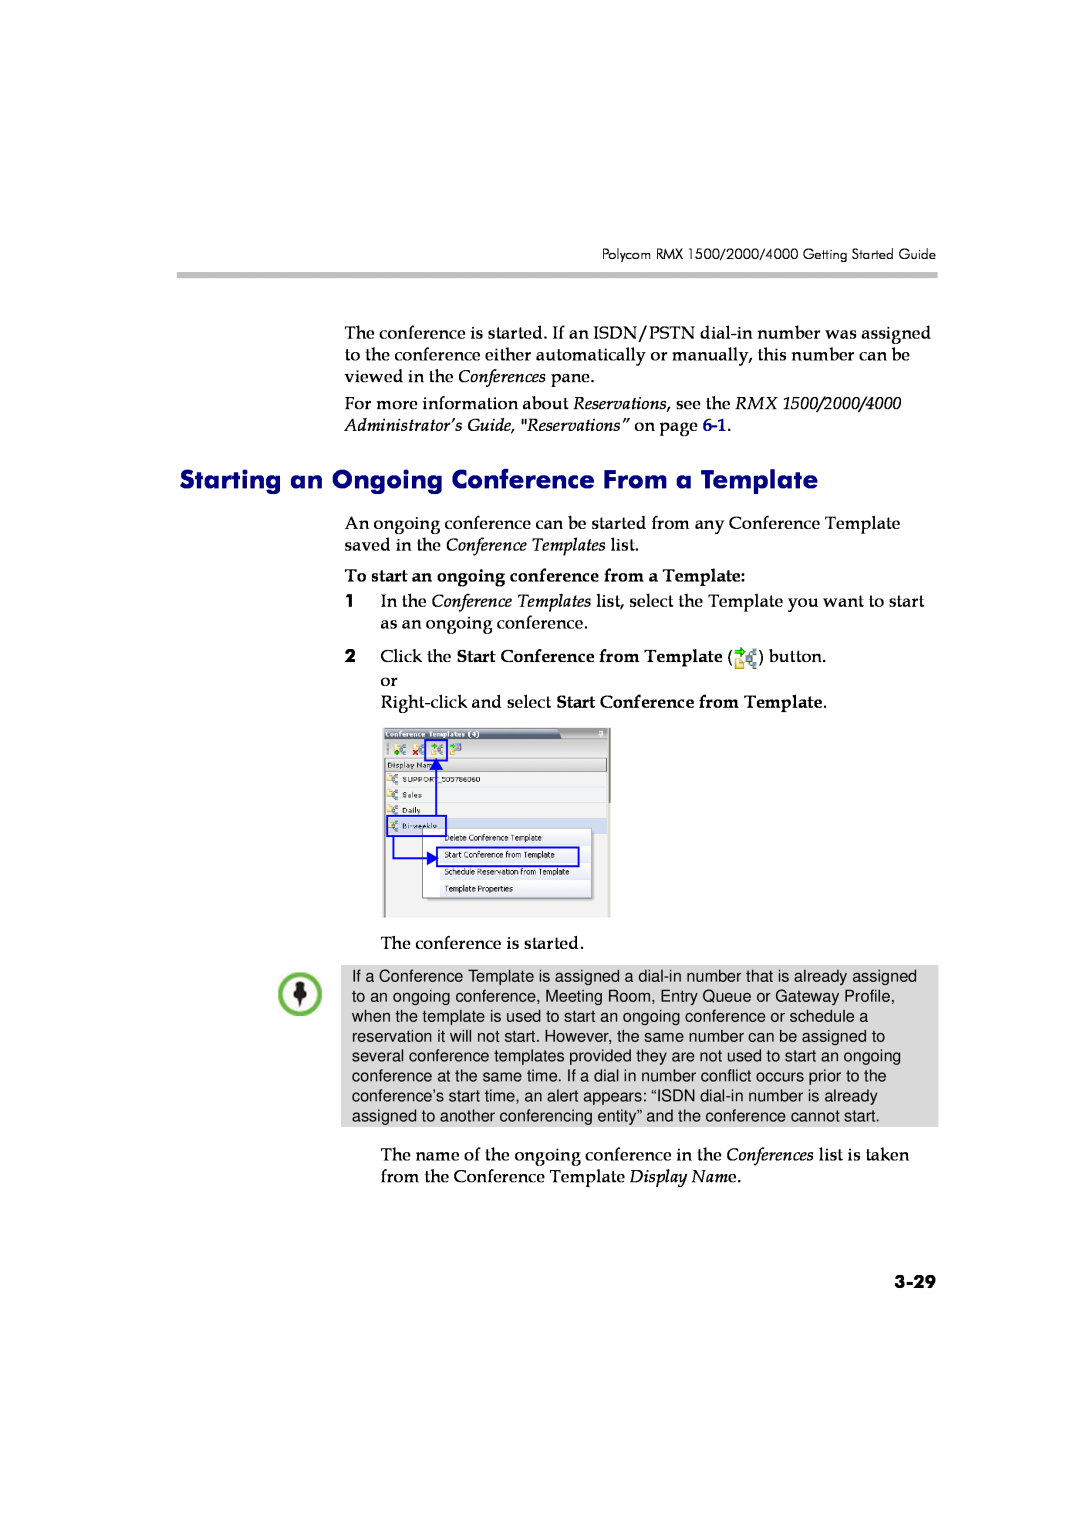 Polycom DOC2560A manual Starting an Ongoing Conference From a Template, Administrator’s Guide, Reservations” on page, 3-29 